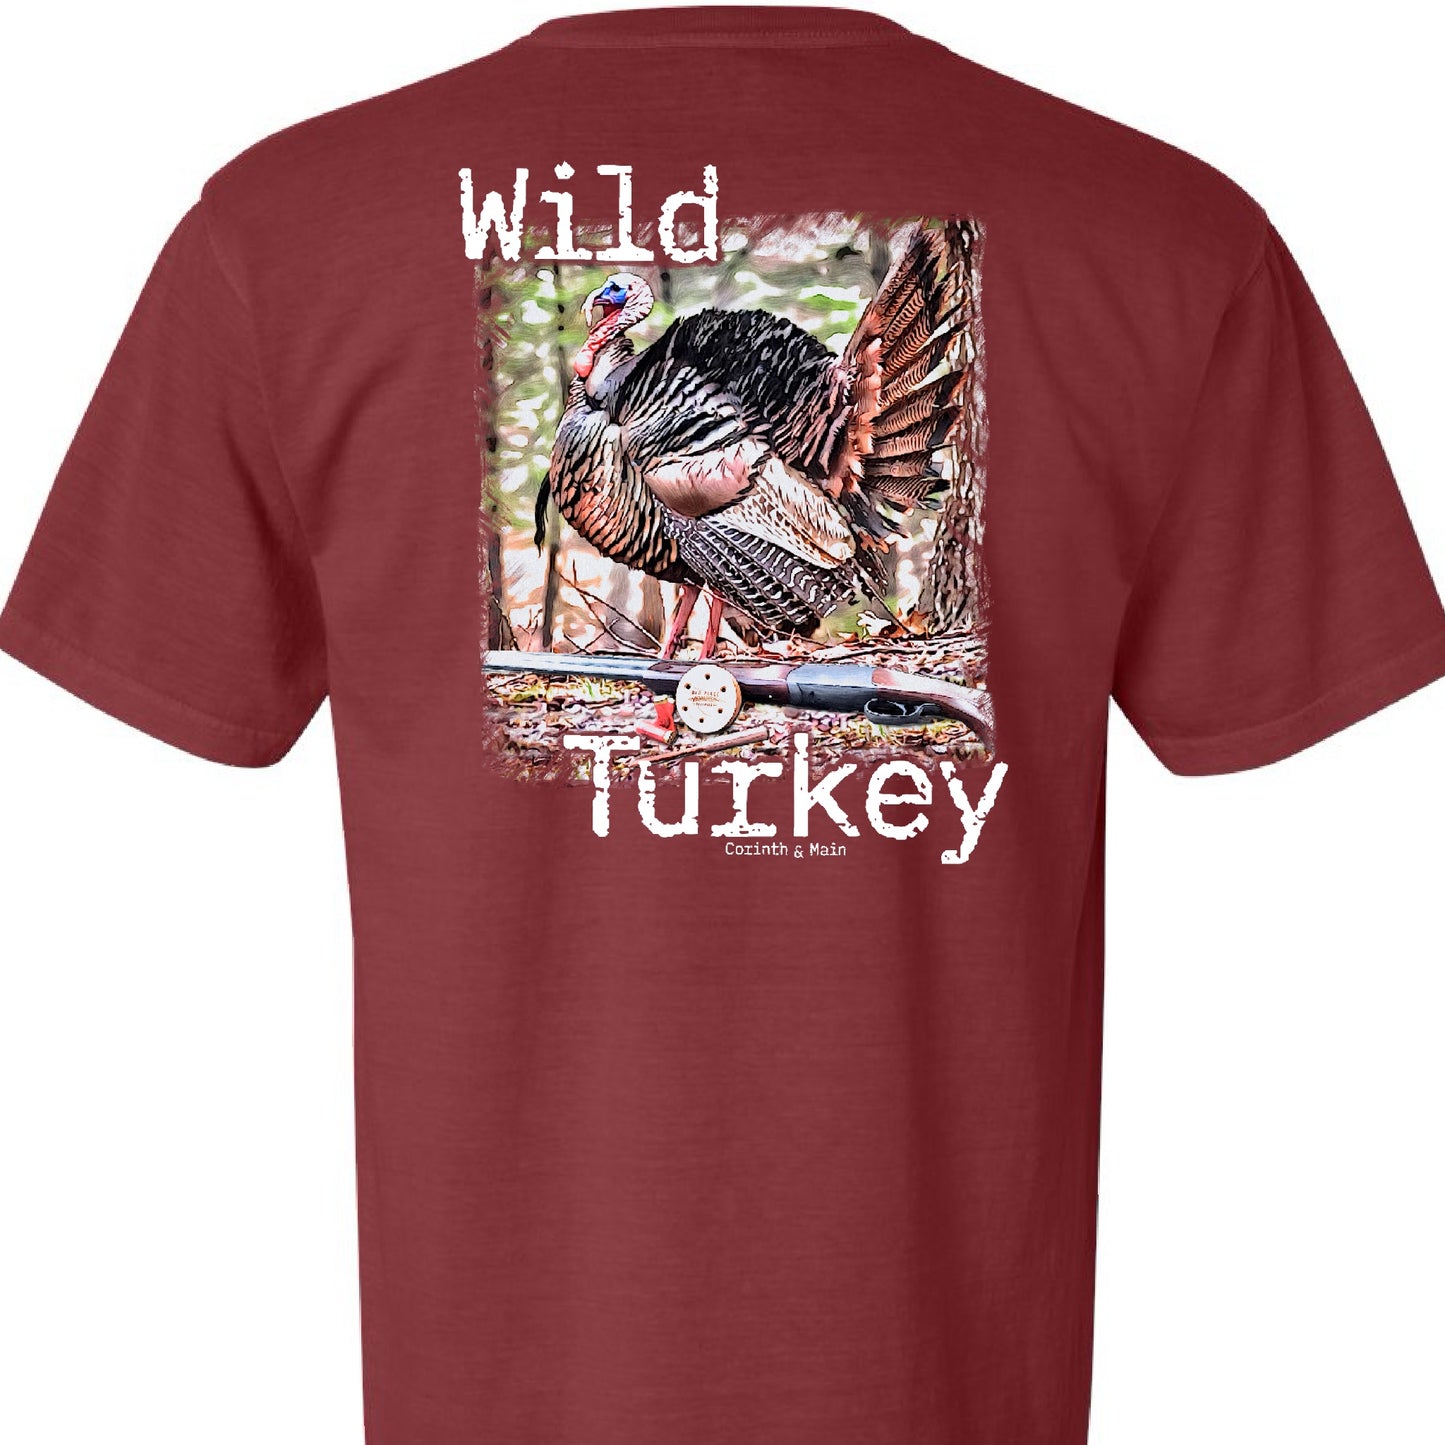 Wild Turkey with Old Place Outdoors